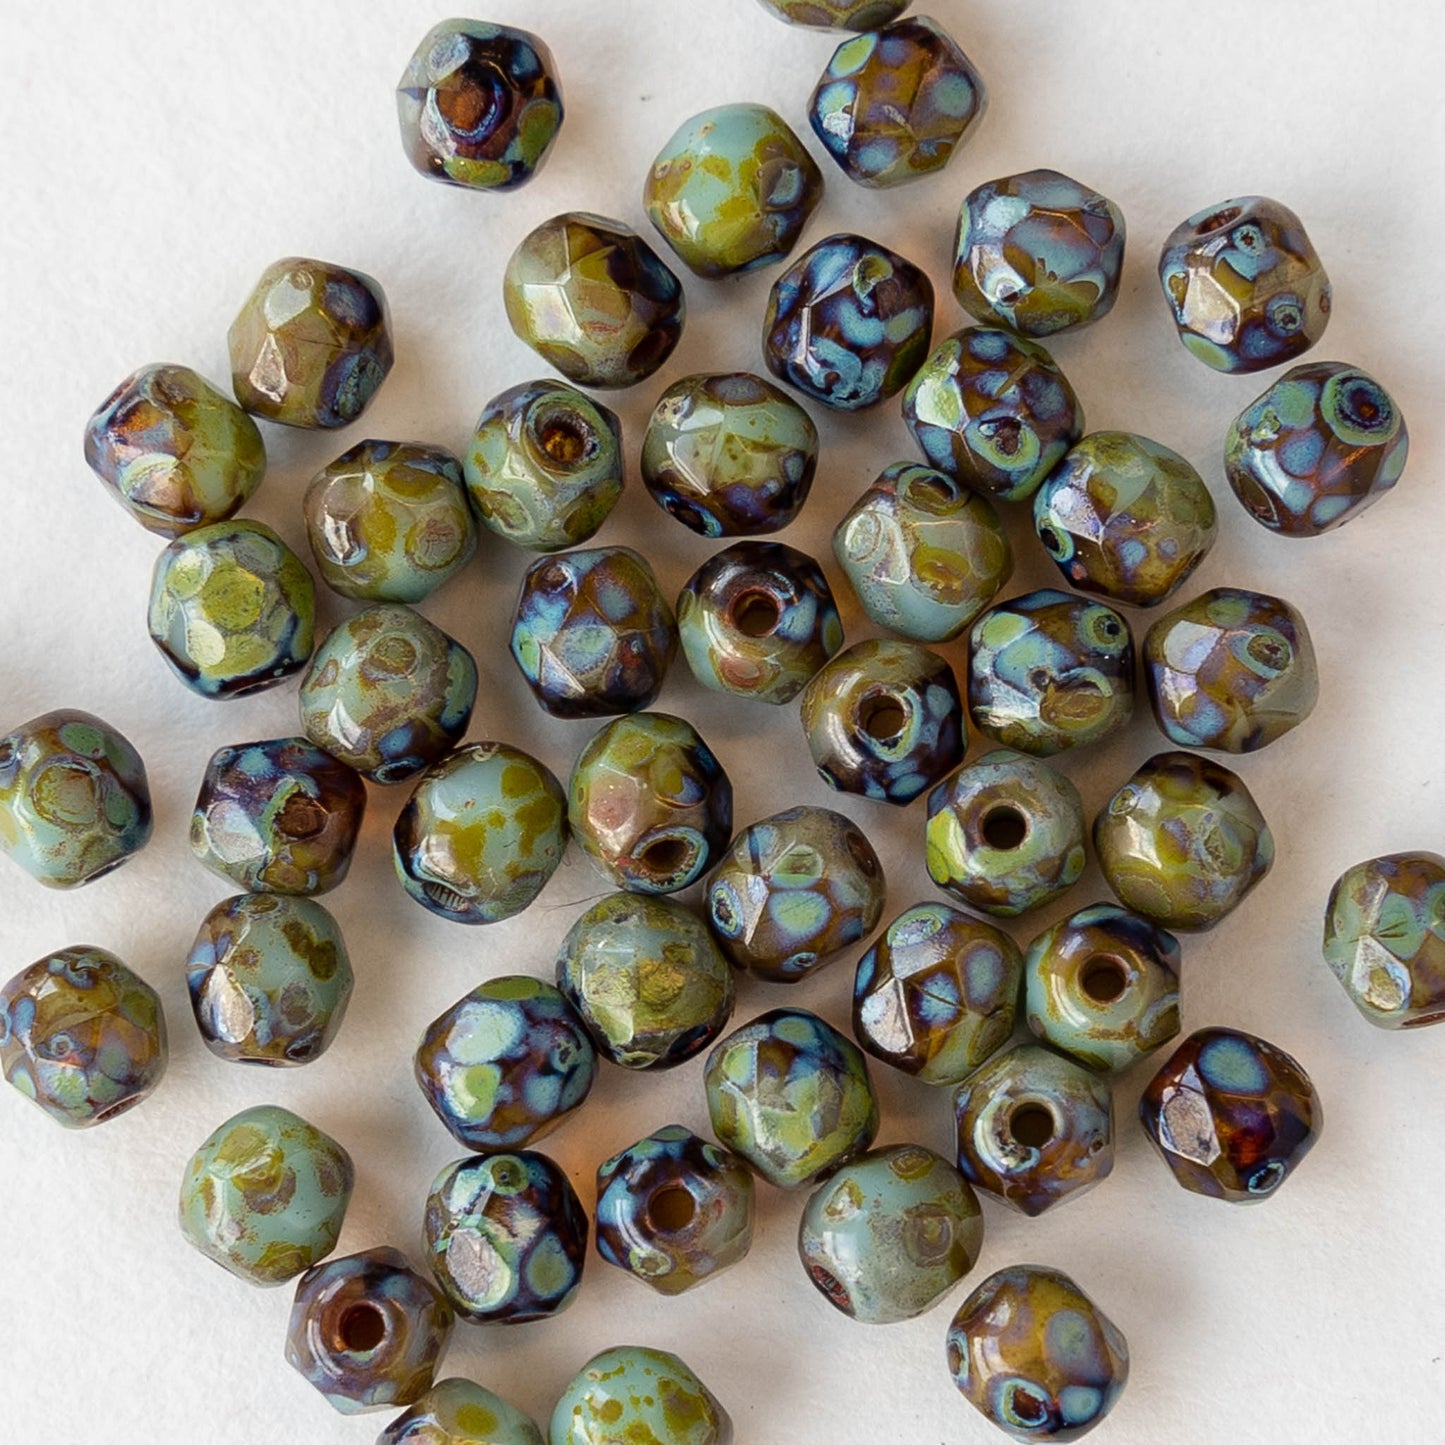 4mm Round Firepolished Beads - Amber and Tea Green with Picasso Finish - 100 Beads